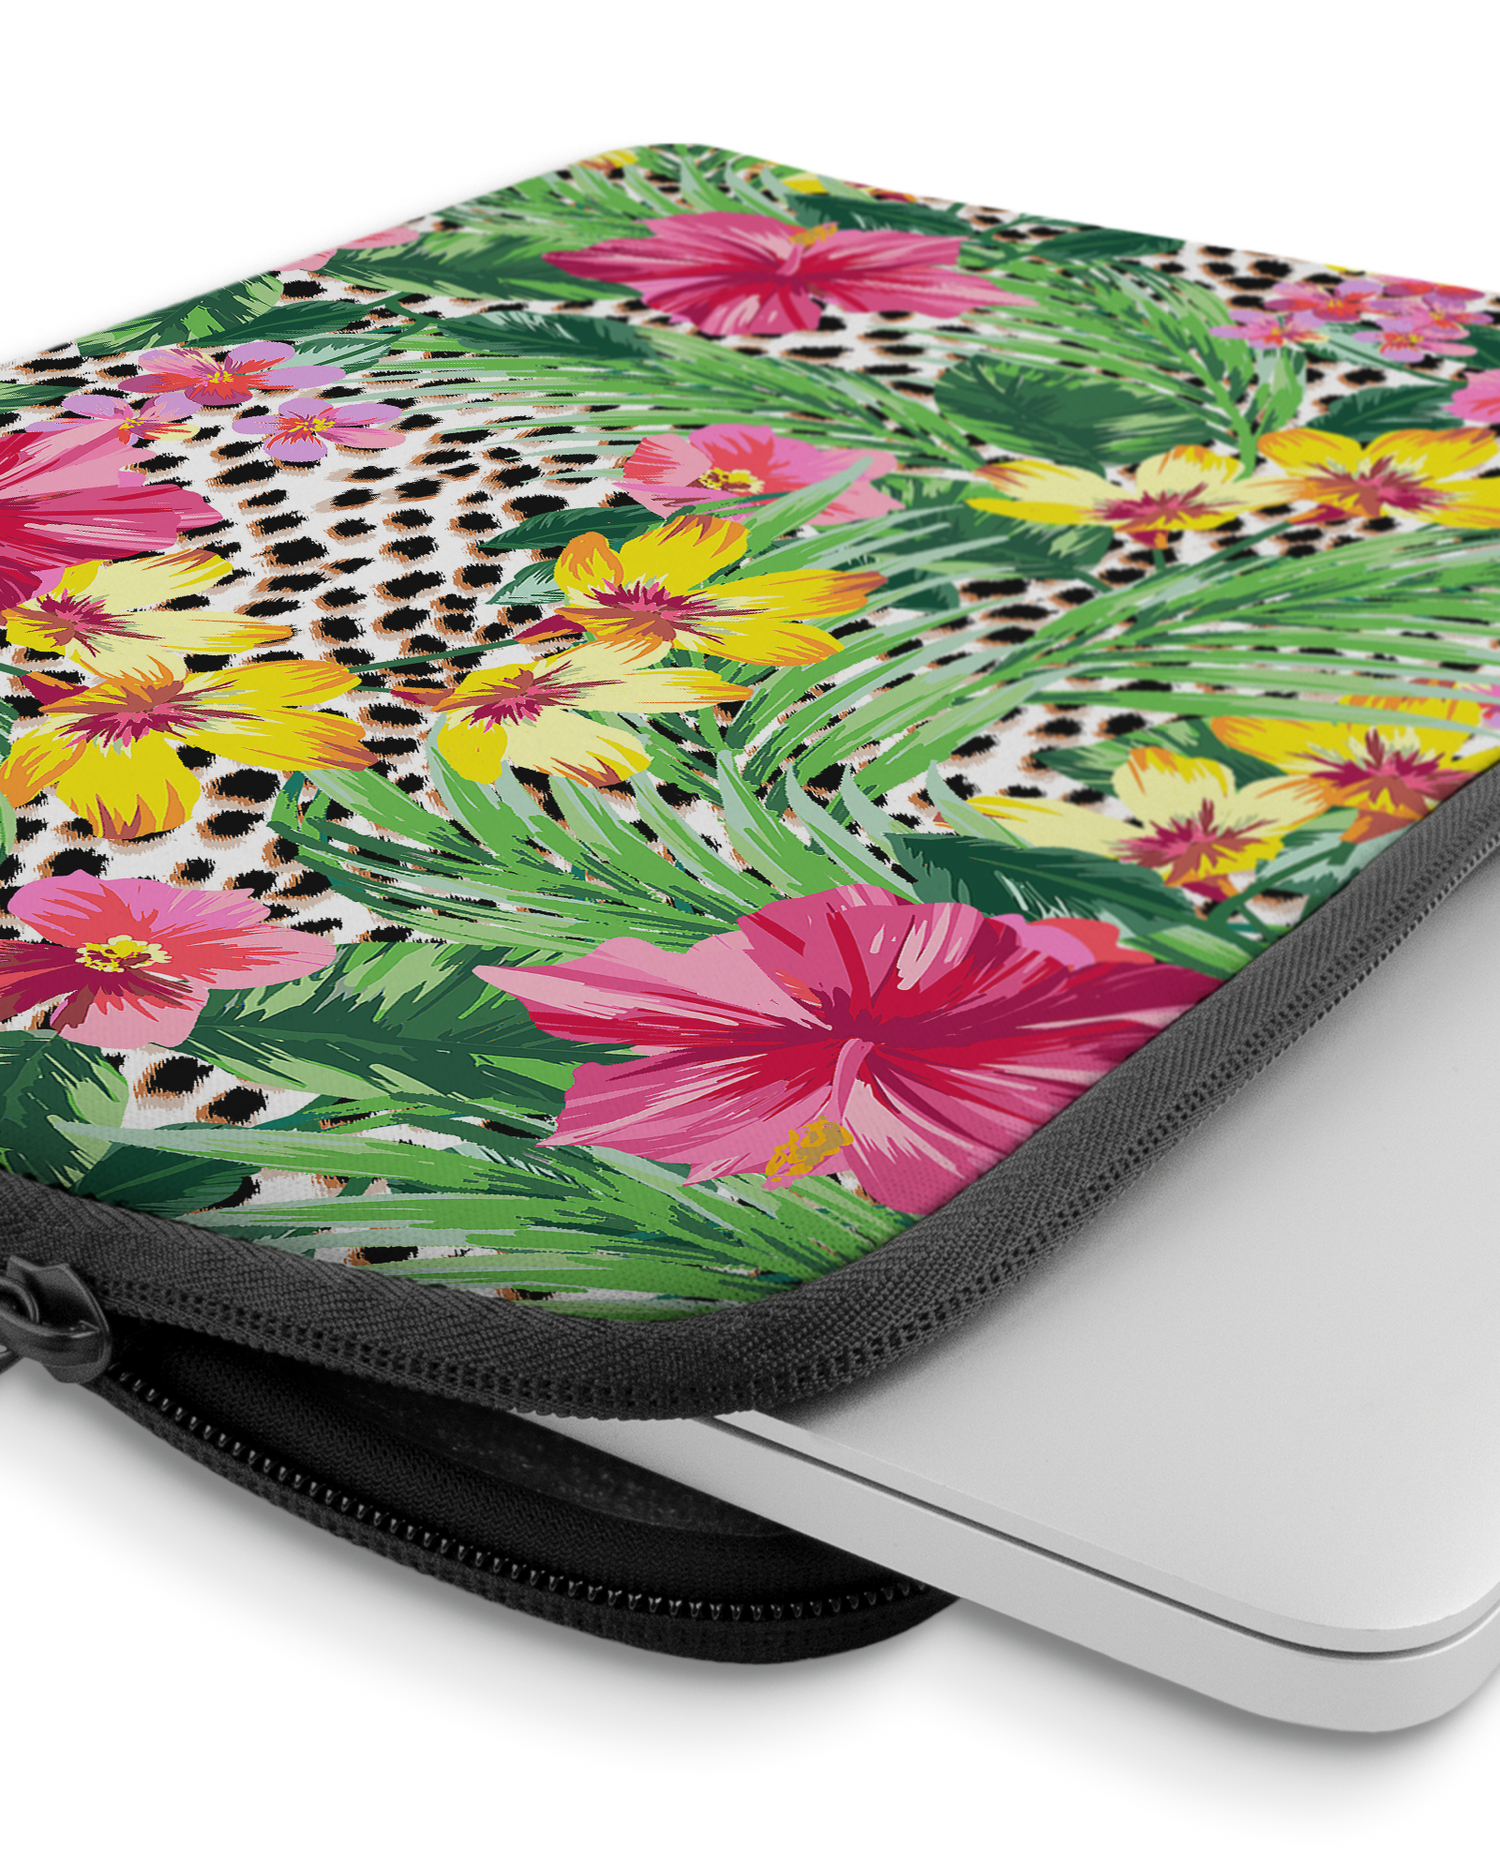 Tropical Cheetah Laptop Case 13-14 inch with device inside